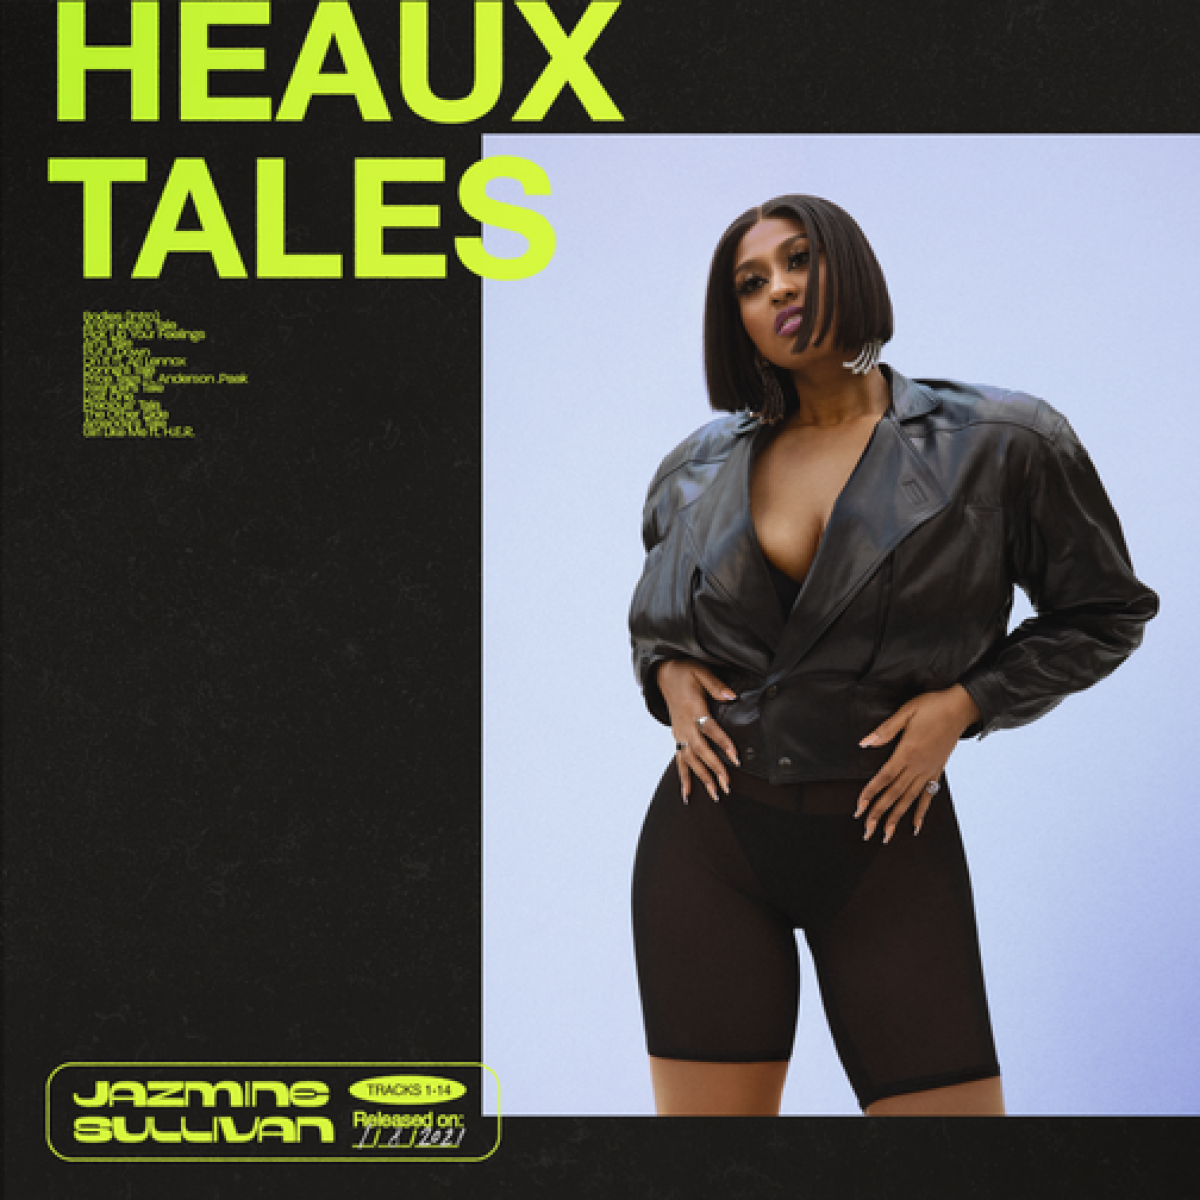 Jazmine Sullivan's 'Heaux Tales' Provides A Narrative For Black Women To Reclaim Ownership Of Our Sexuality